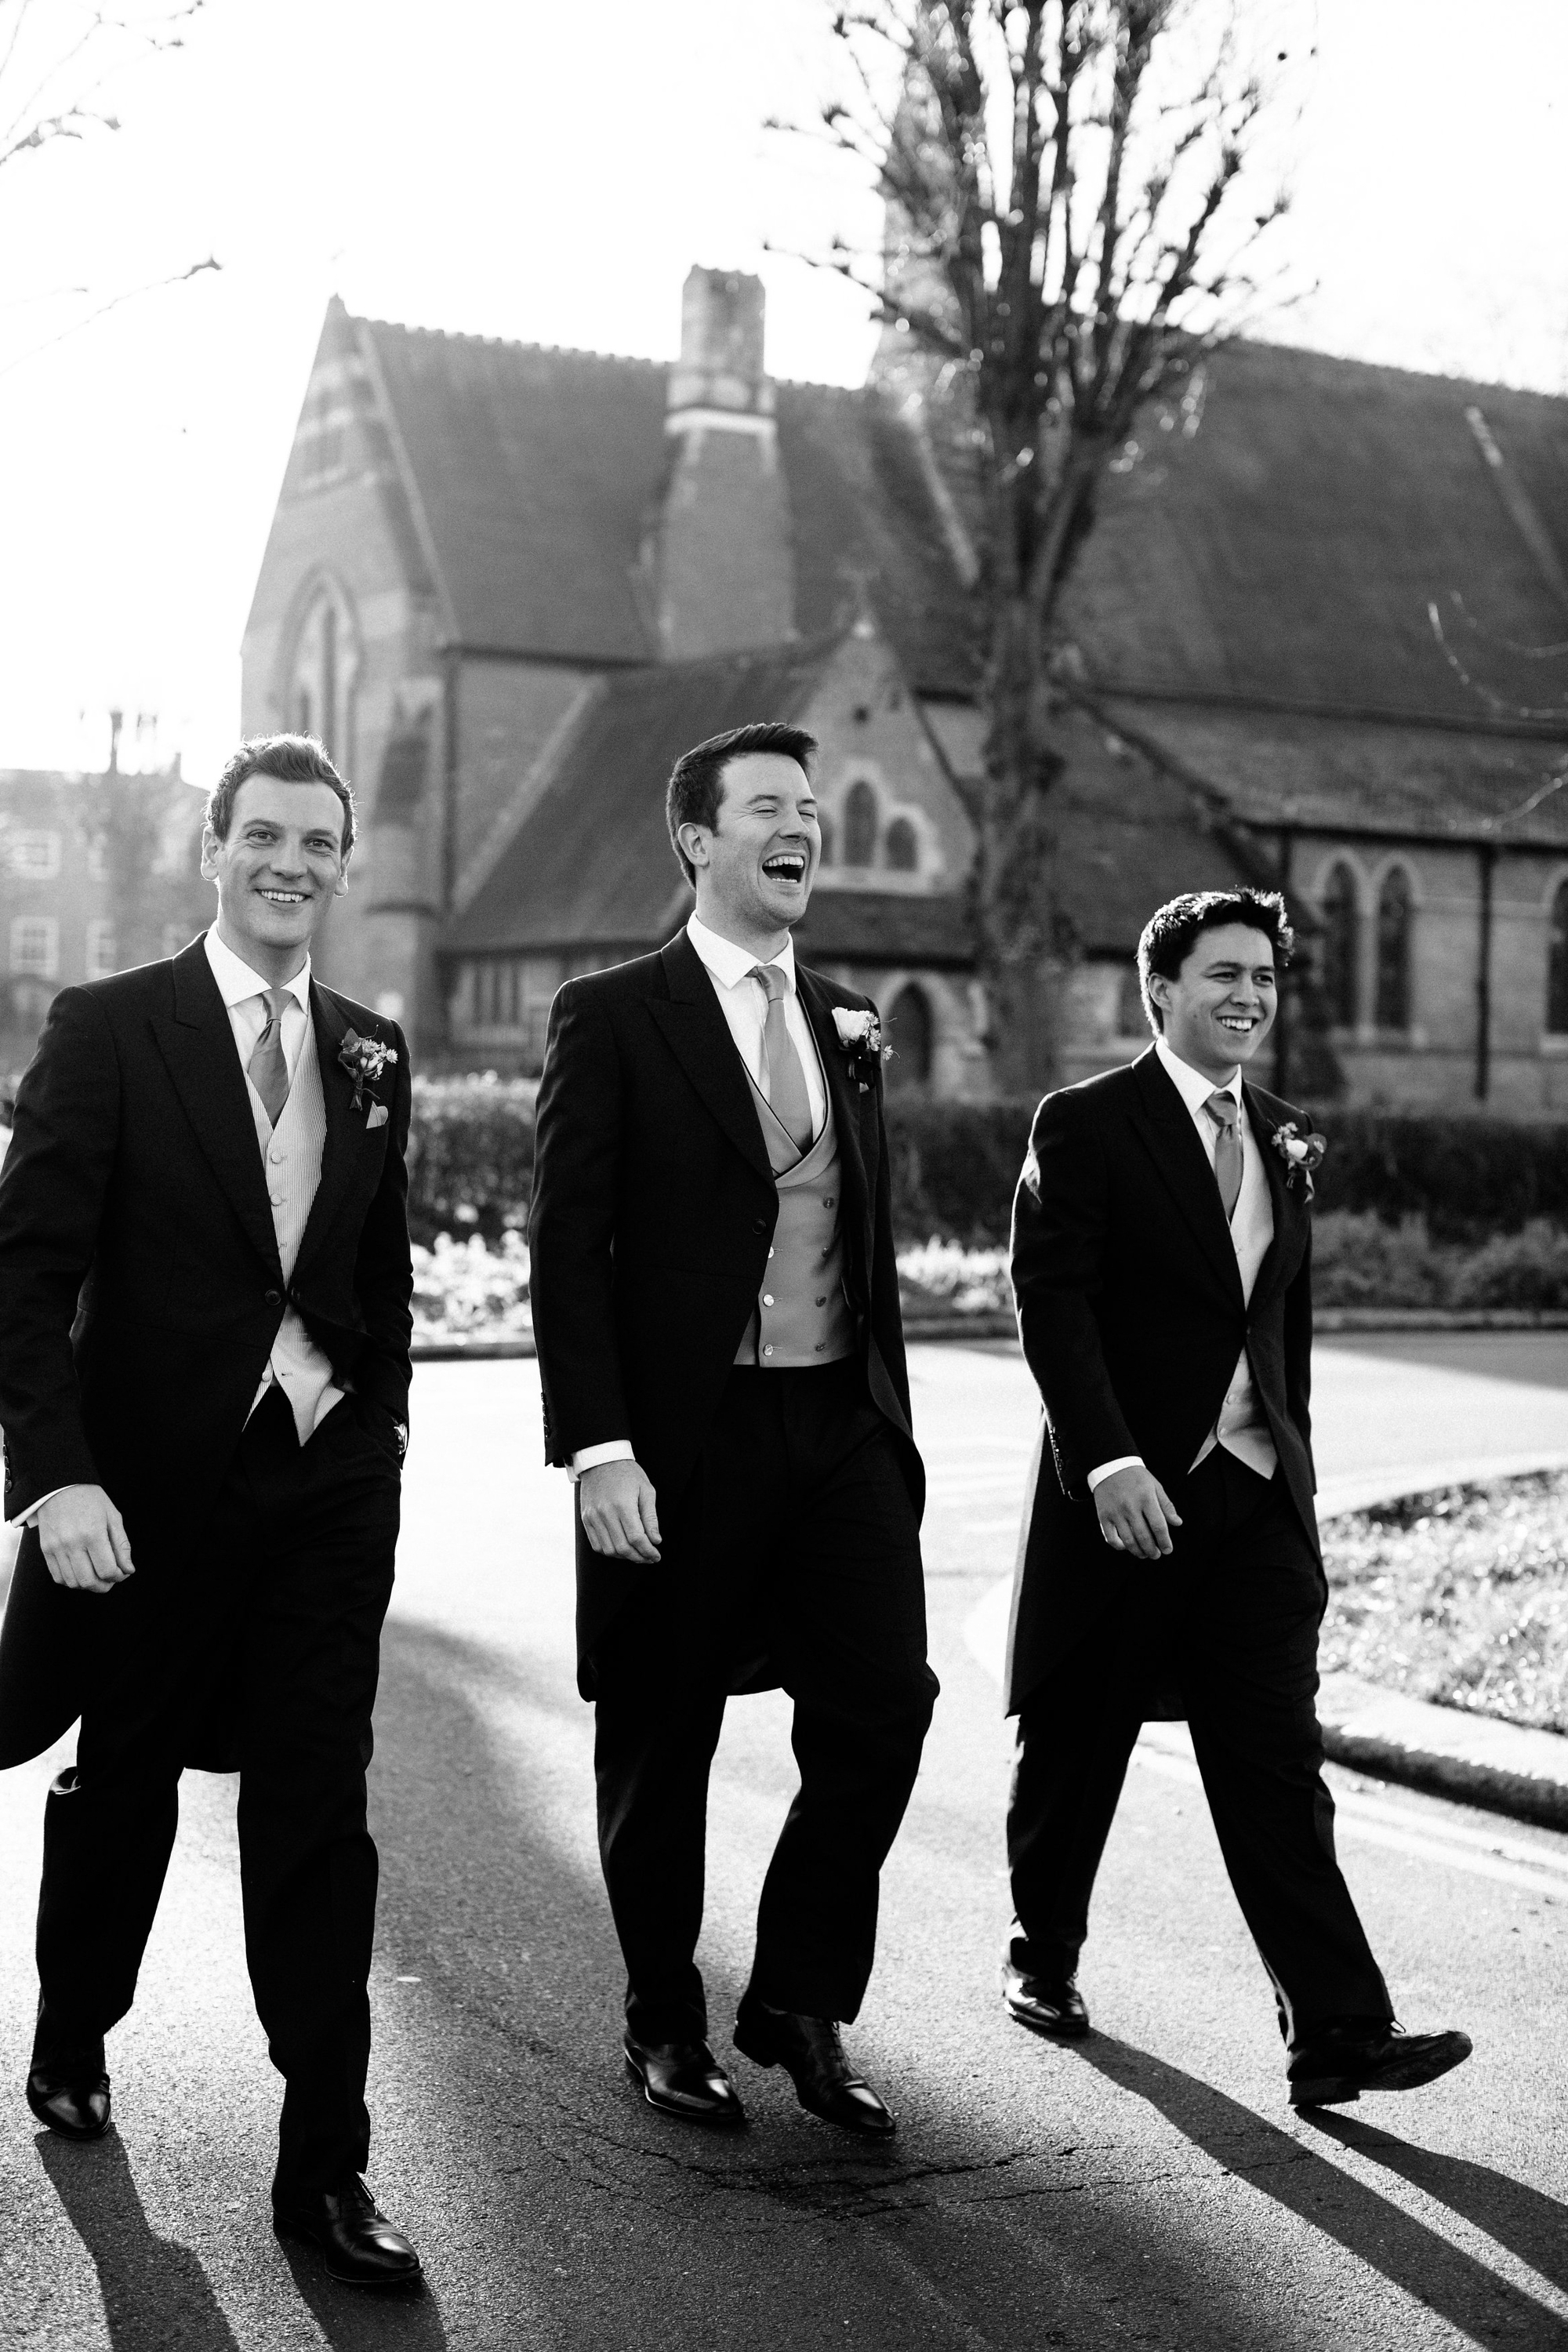 Groomsmen in tails on the way to the church